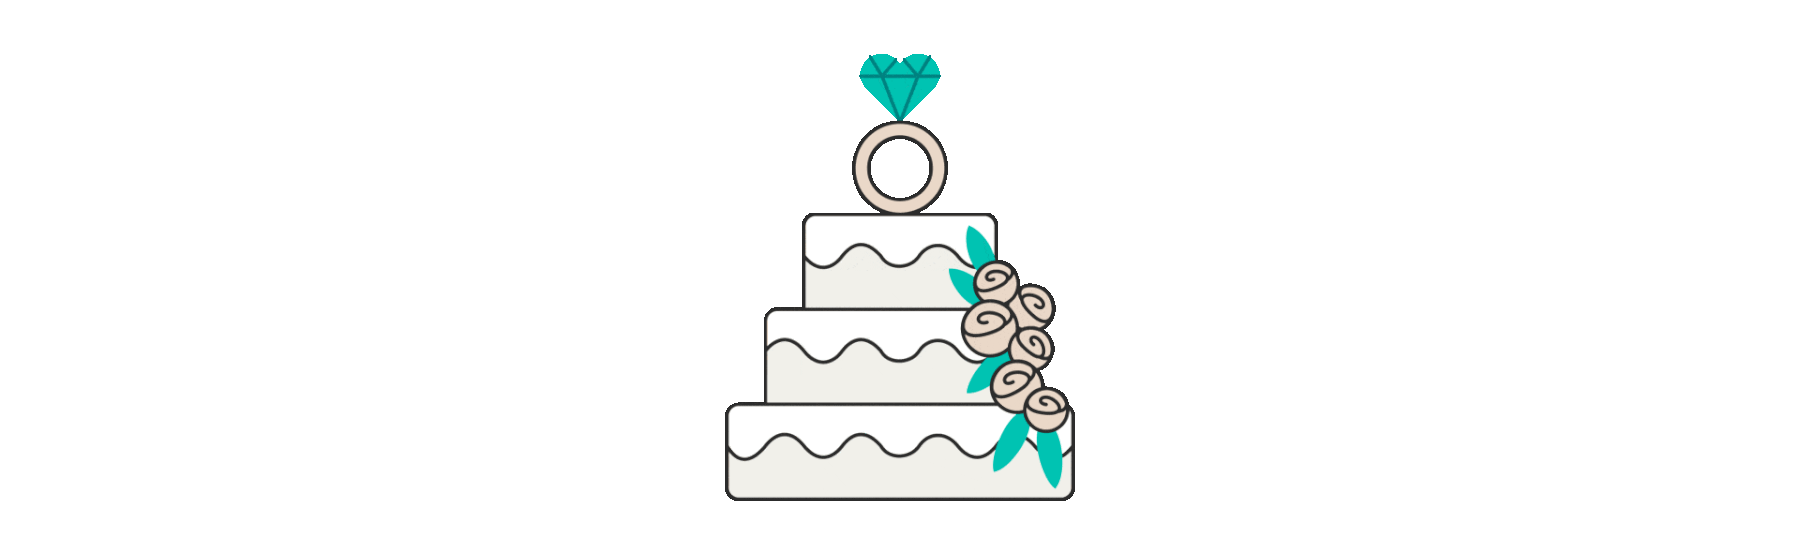 Wedding cake with flowers and ring topper illustration